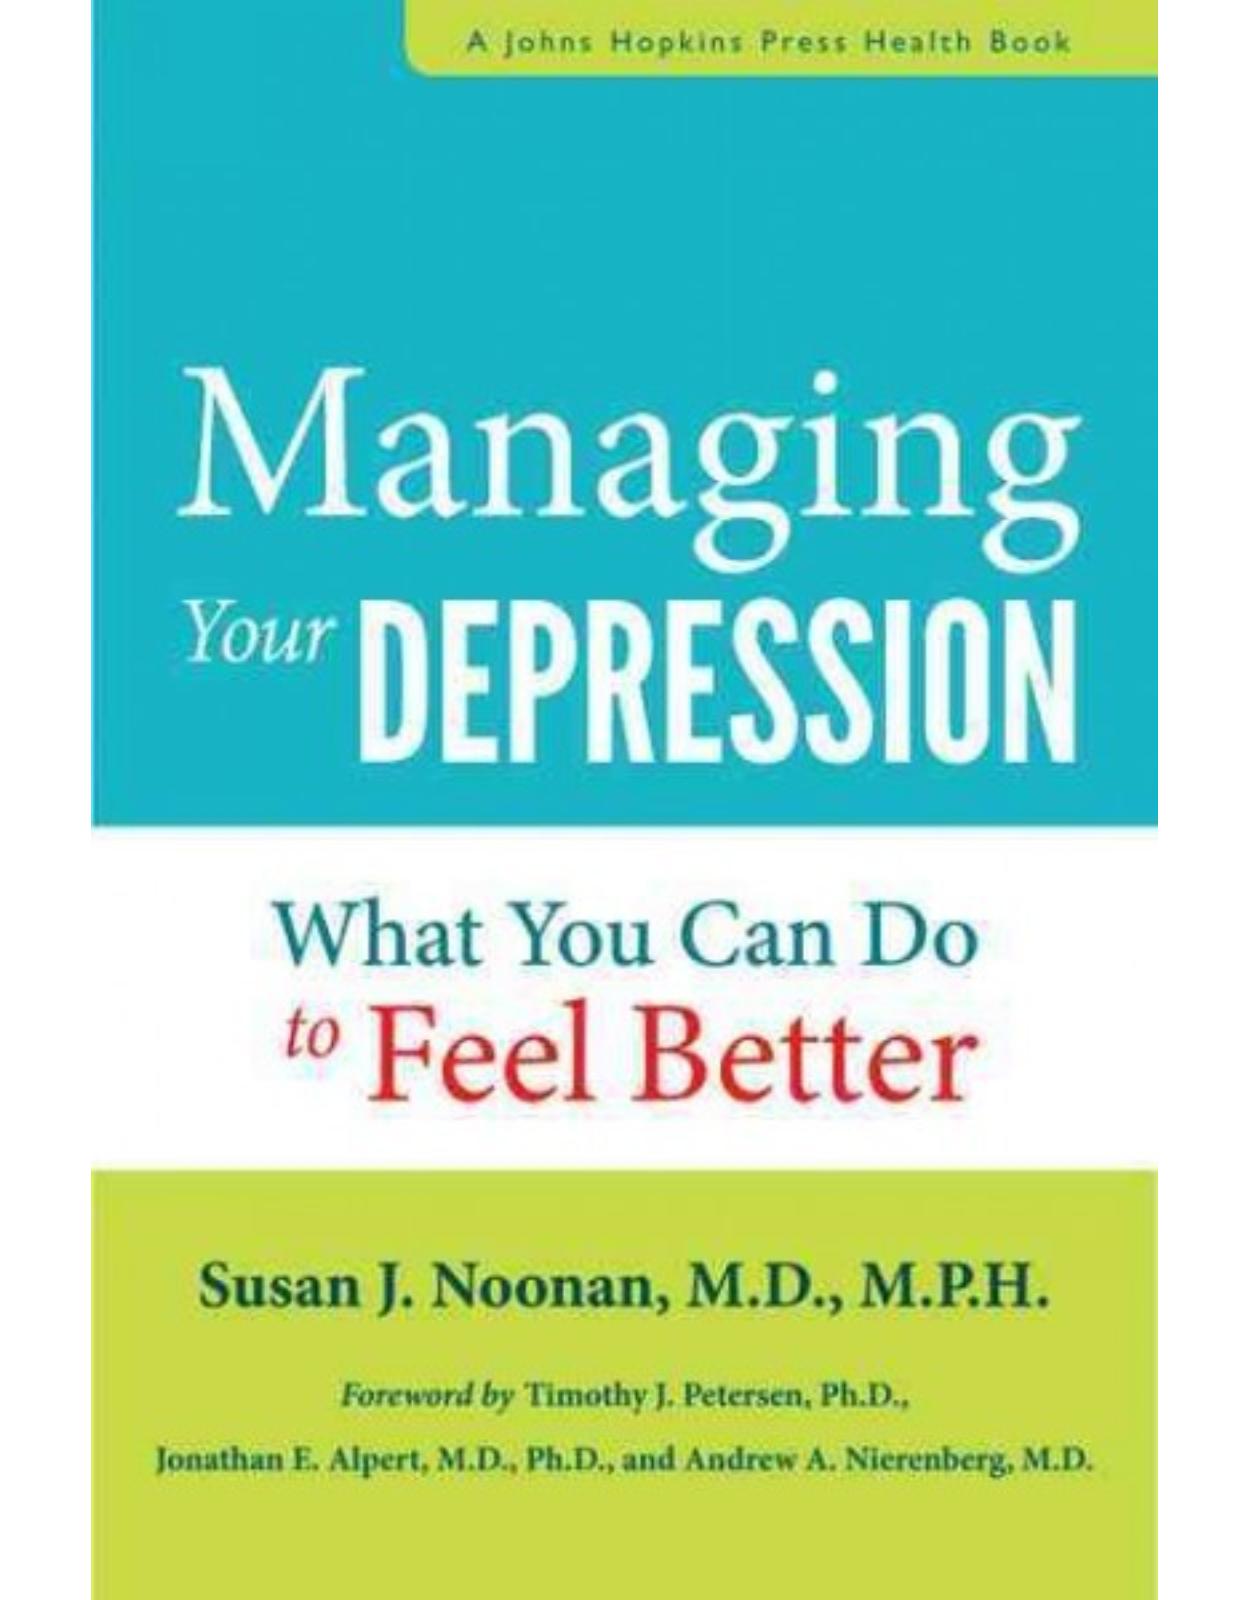 Managing Your Depression. What You Can Do to Feel Better